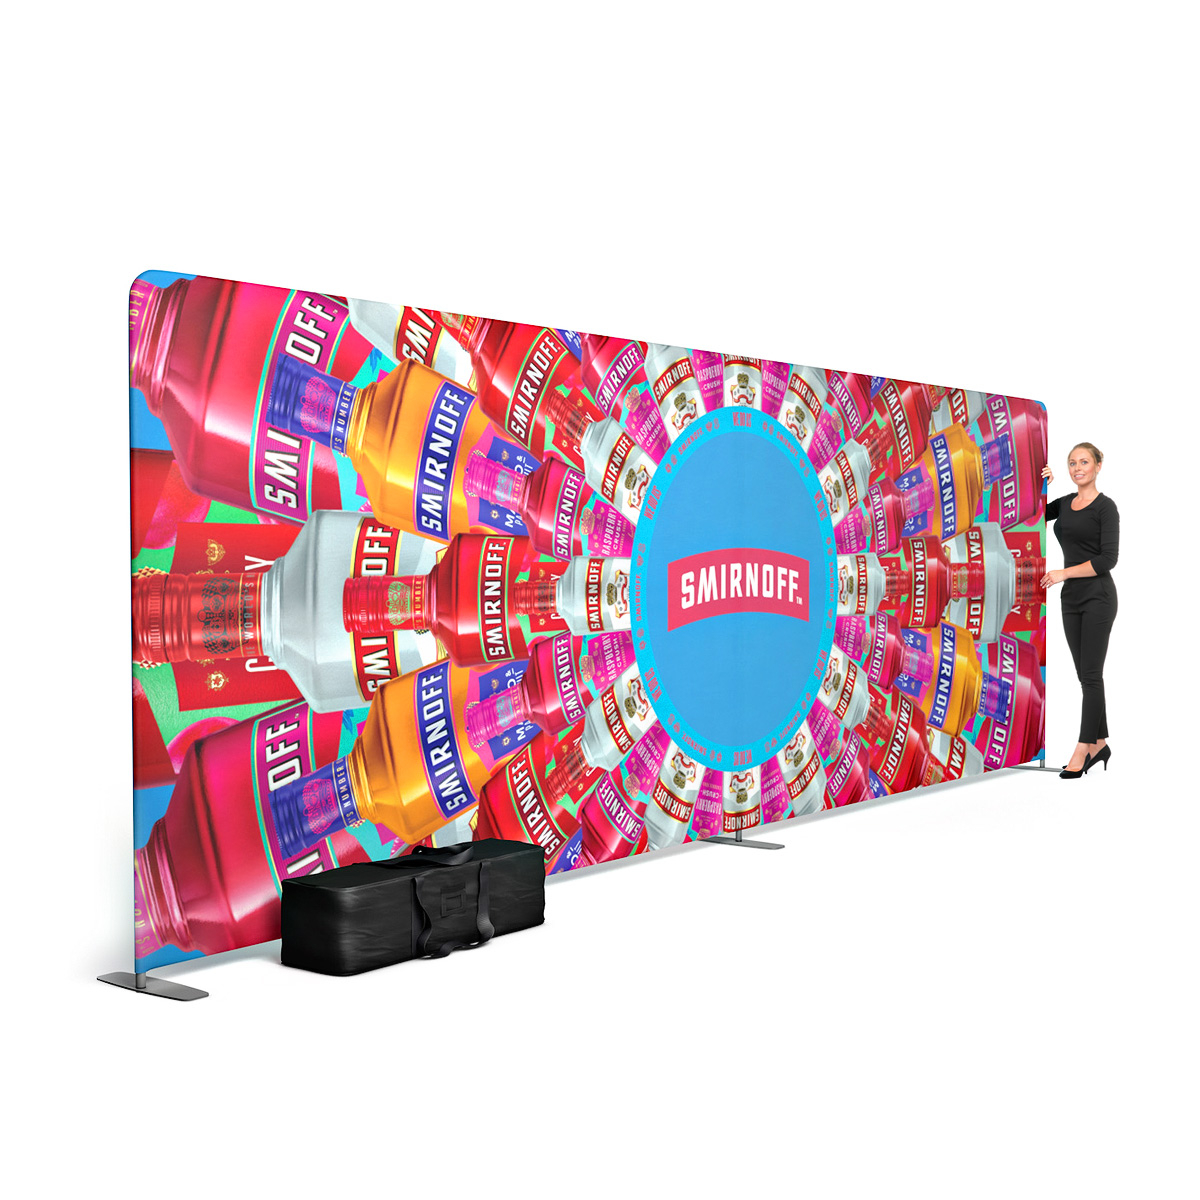 FABRIWALL Tension Fabric Exhibition Stand Backwall 6m x 2m